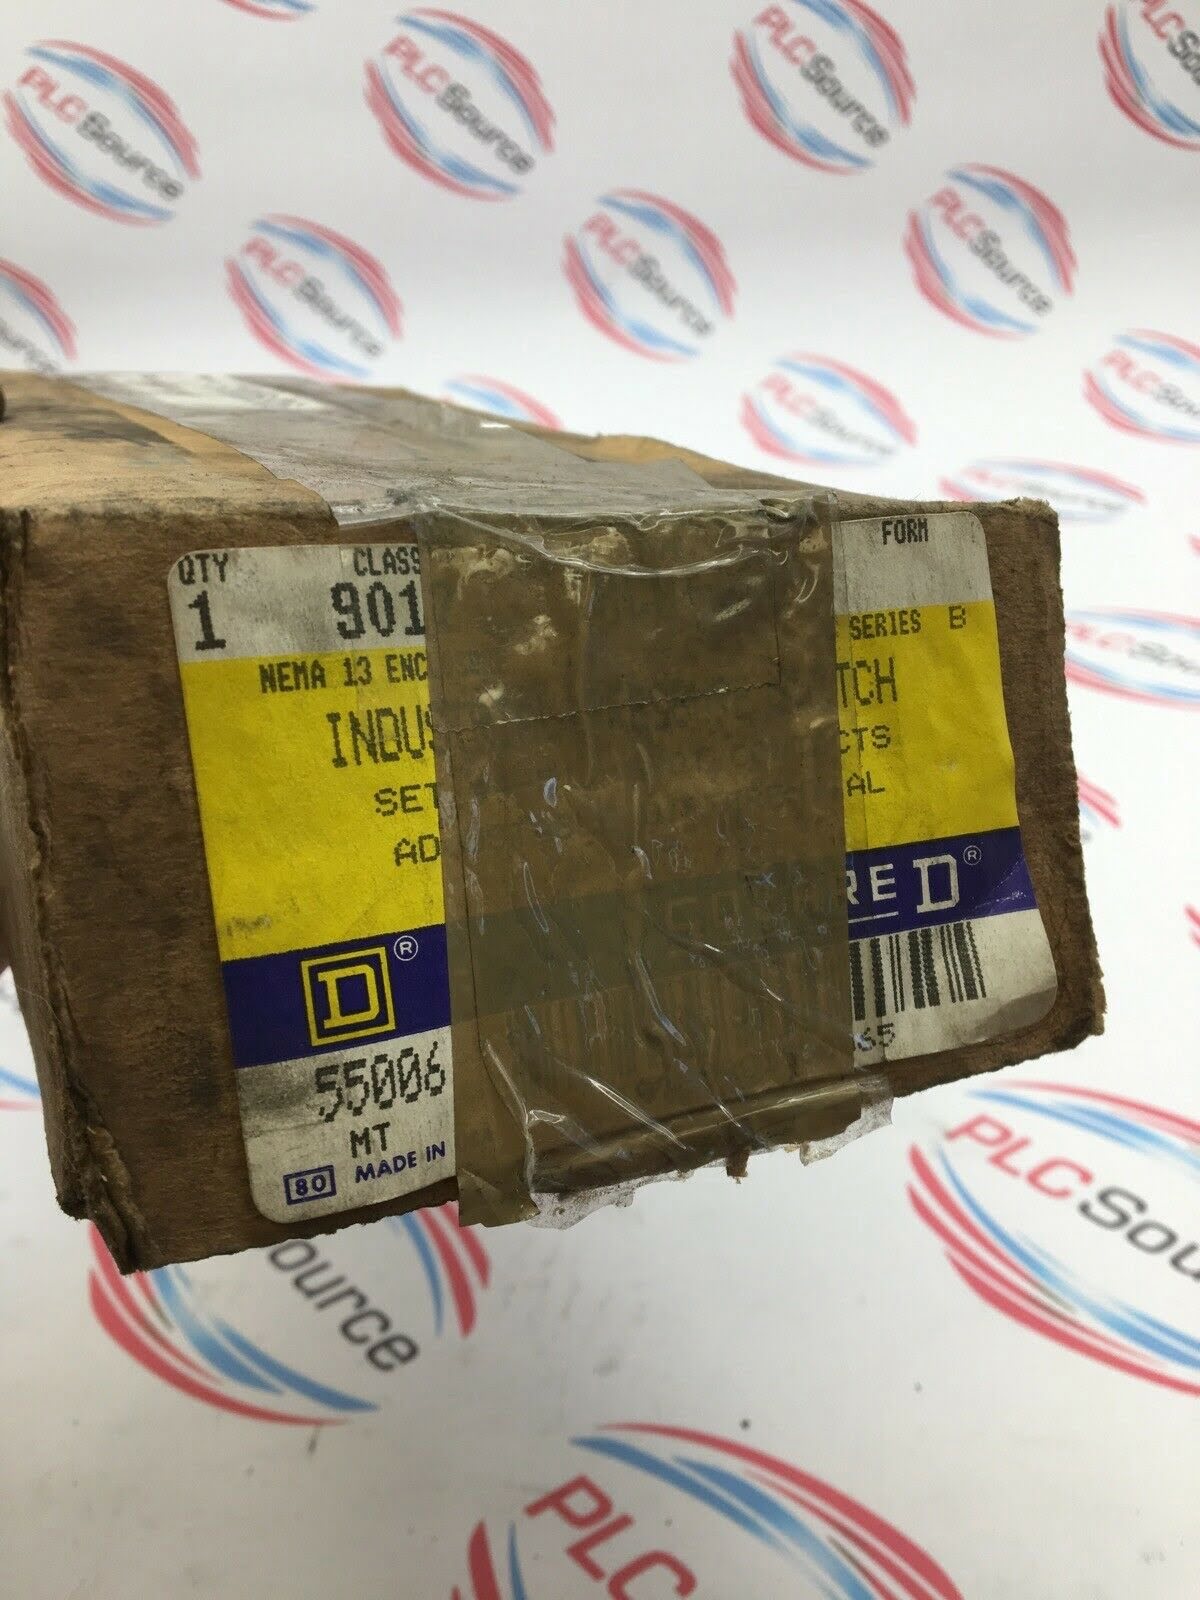 ***NEW*** SQUARE D 9012 ACW5S7 SERIES B INDUSTRIAL PRESSURE SWITCH 3 14 PSI 